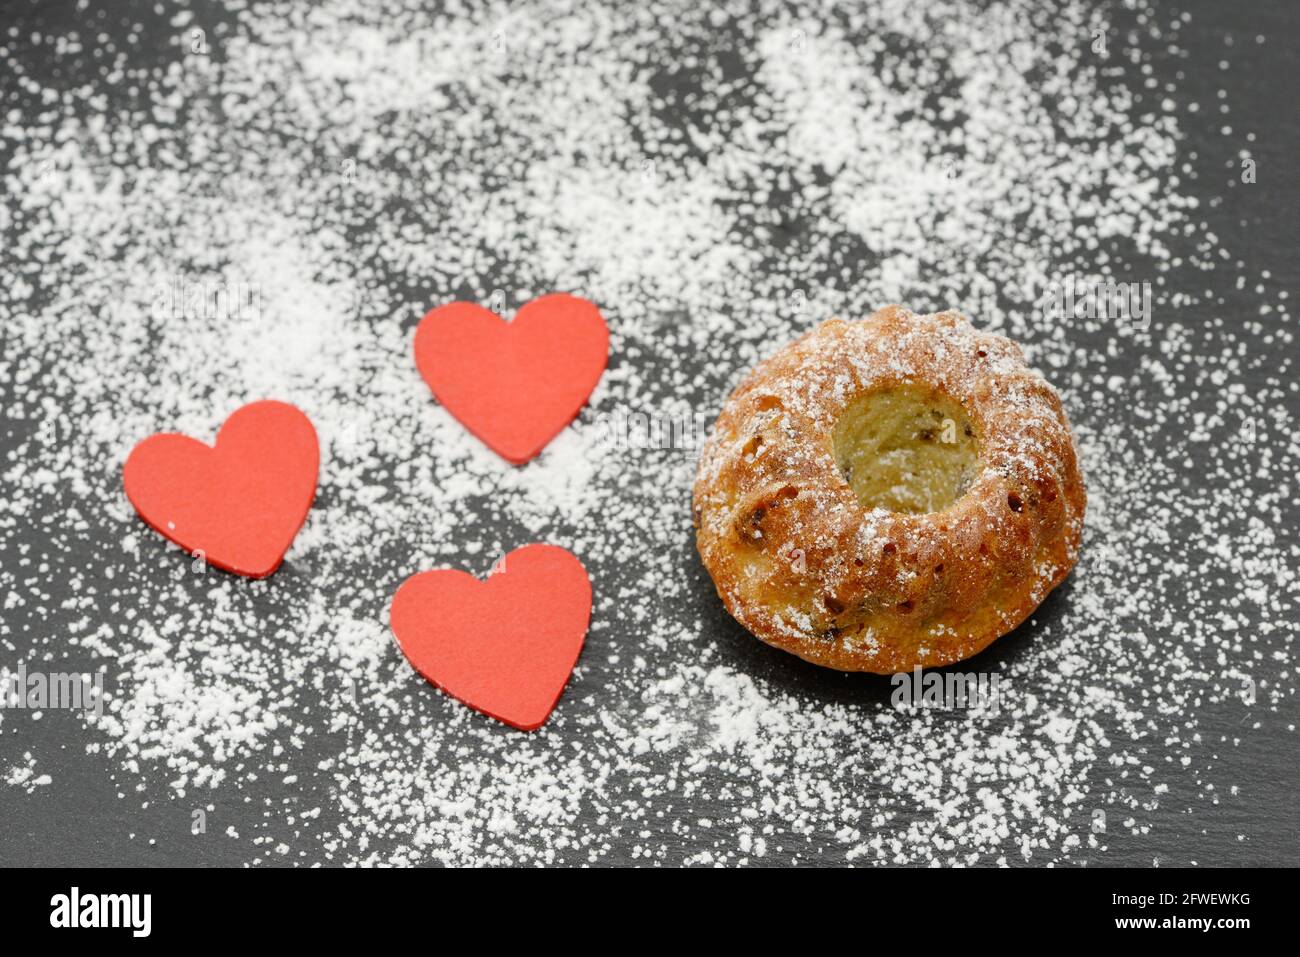 round cake with red heart and powdered sugar on black plate Stock Photo